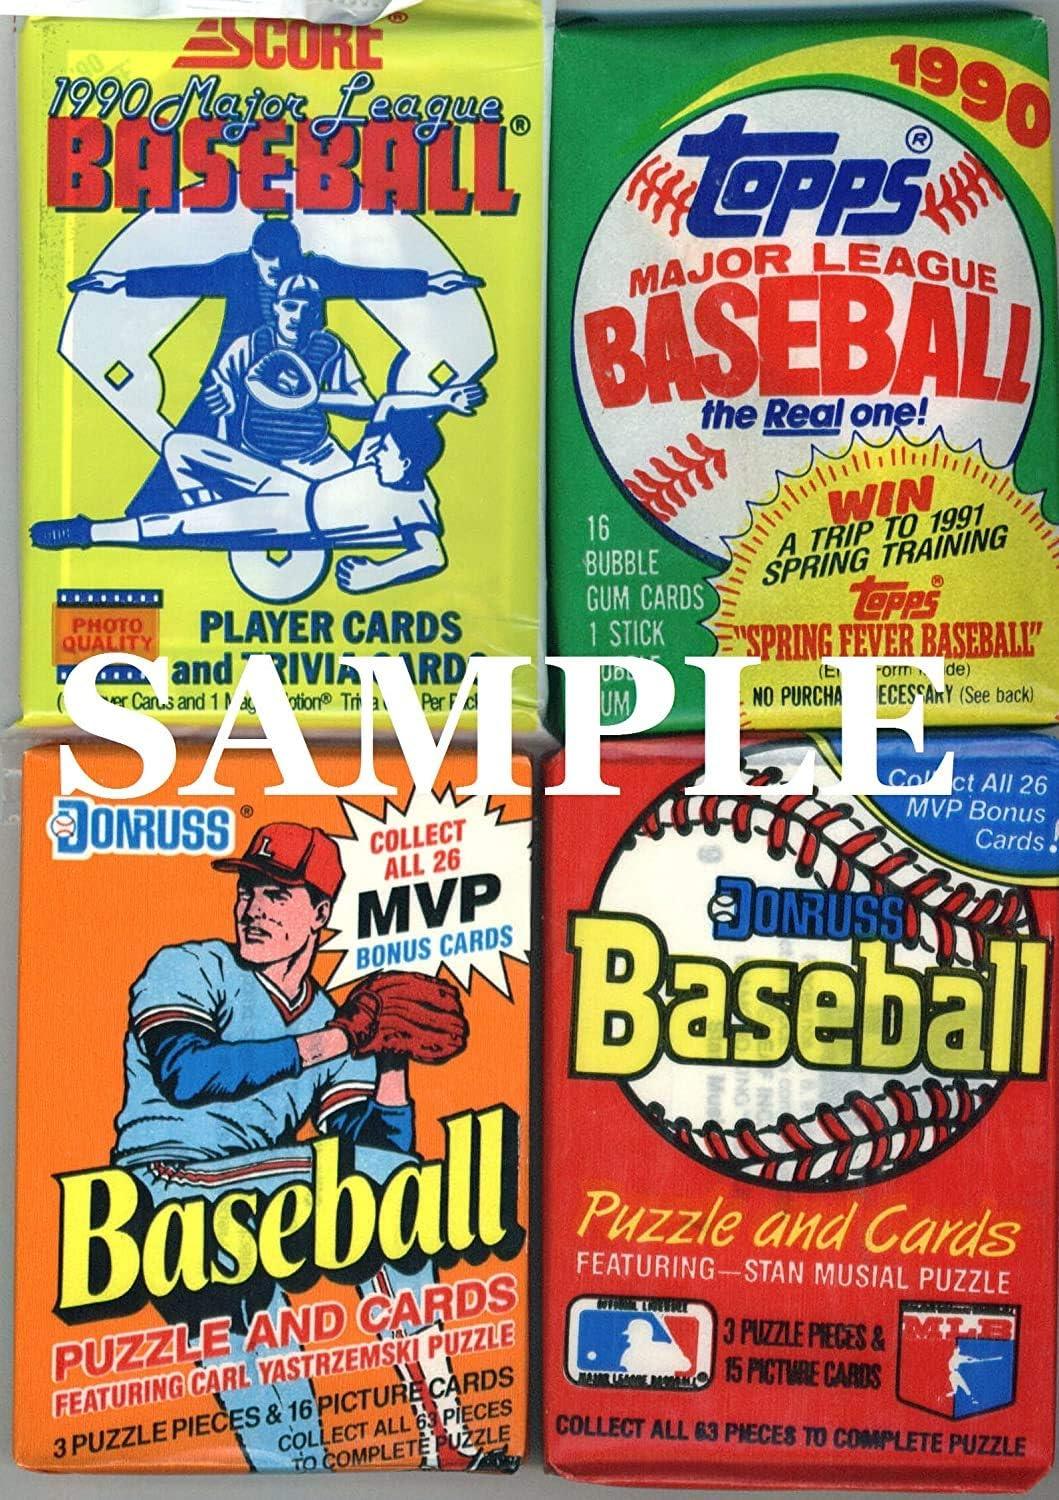 HUGE SALE OF 178 OLD UNOPENED BASEBALL CARDS IN PACKS 1990 AND